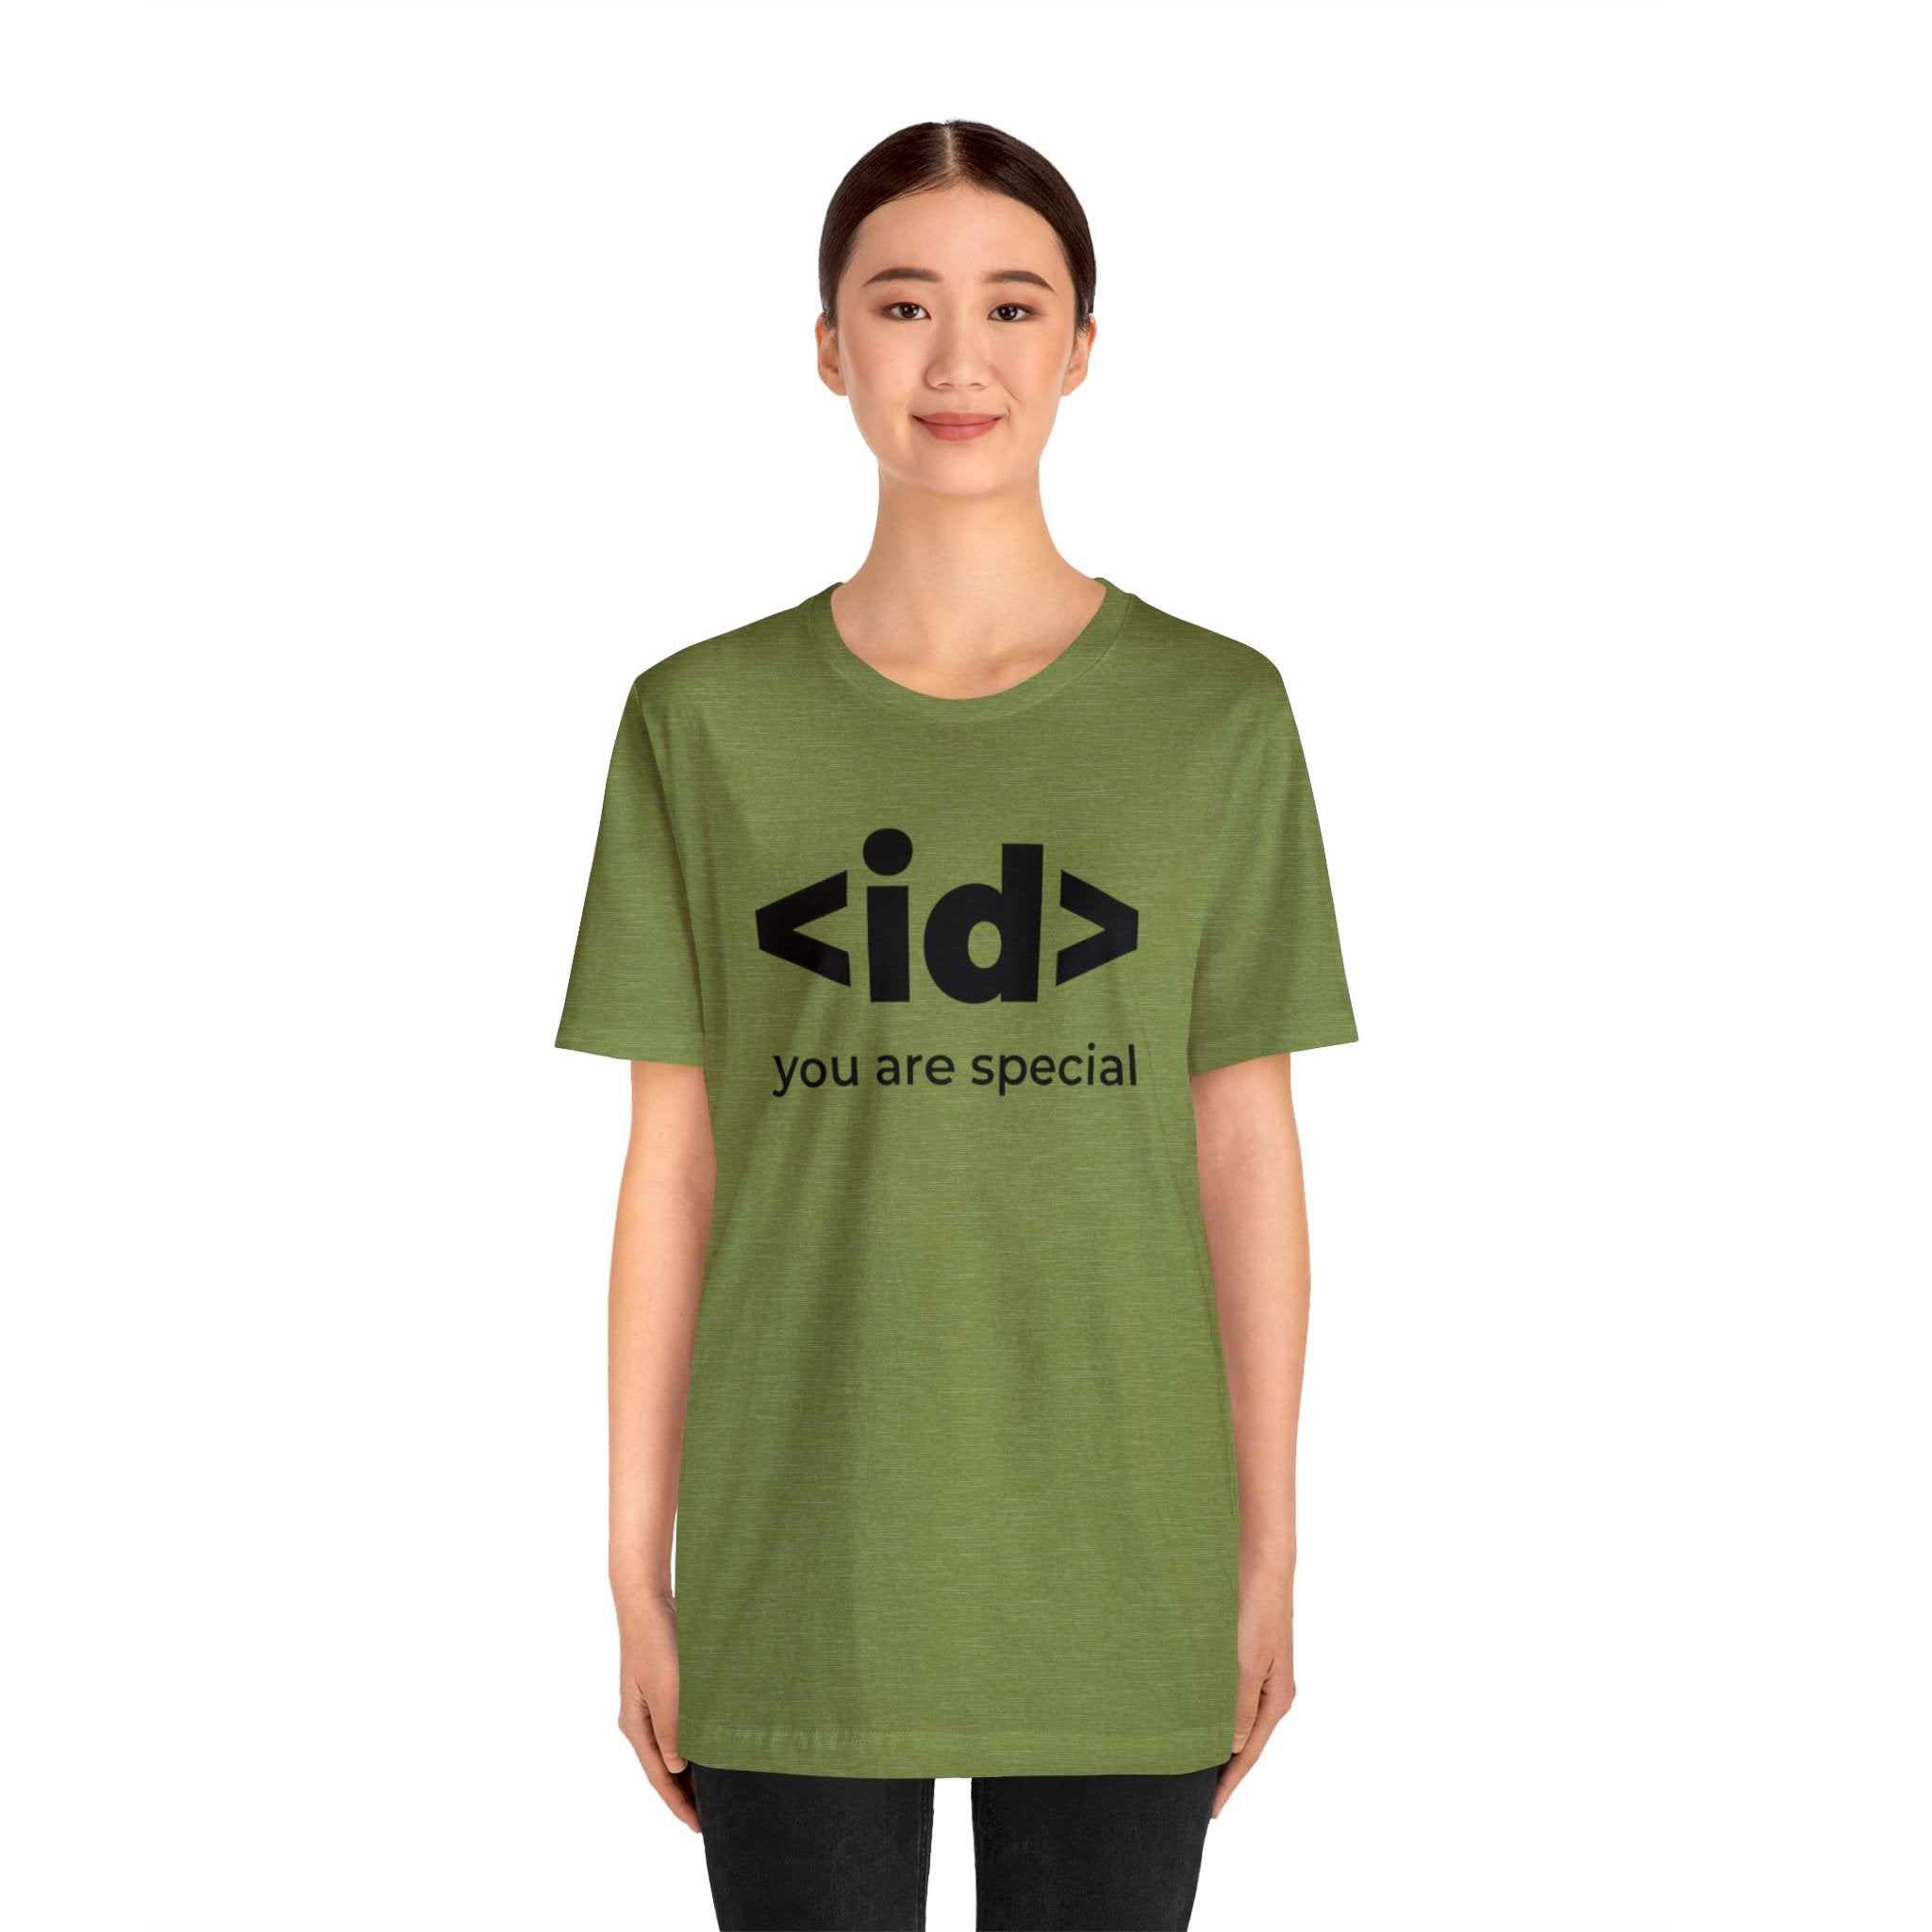 A woman wearing a green t-shirt "brilliantly" showing off the product "<id> You Are Special T-Shirt" on it.